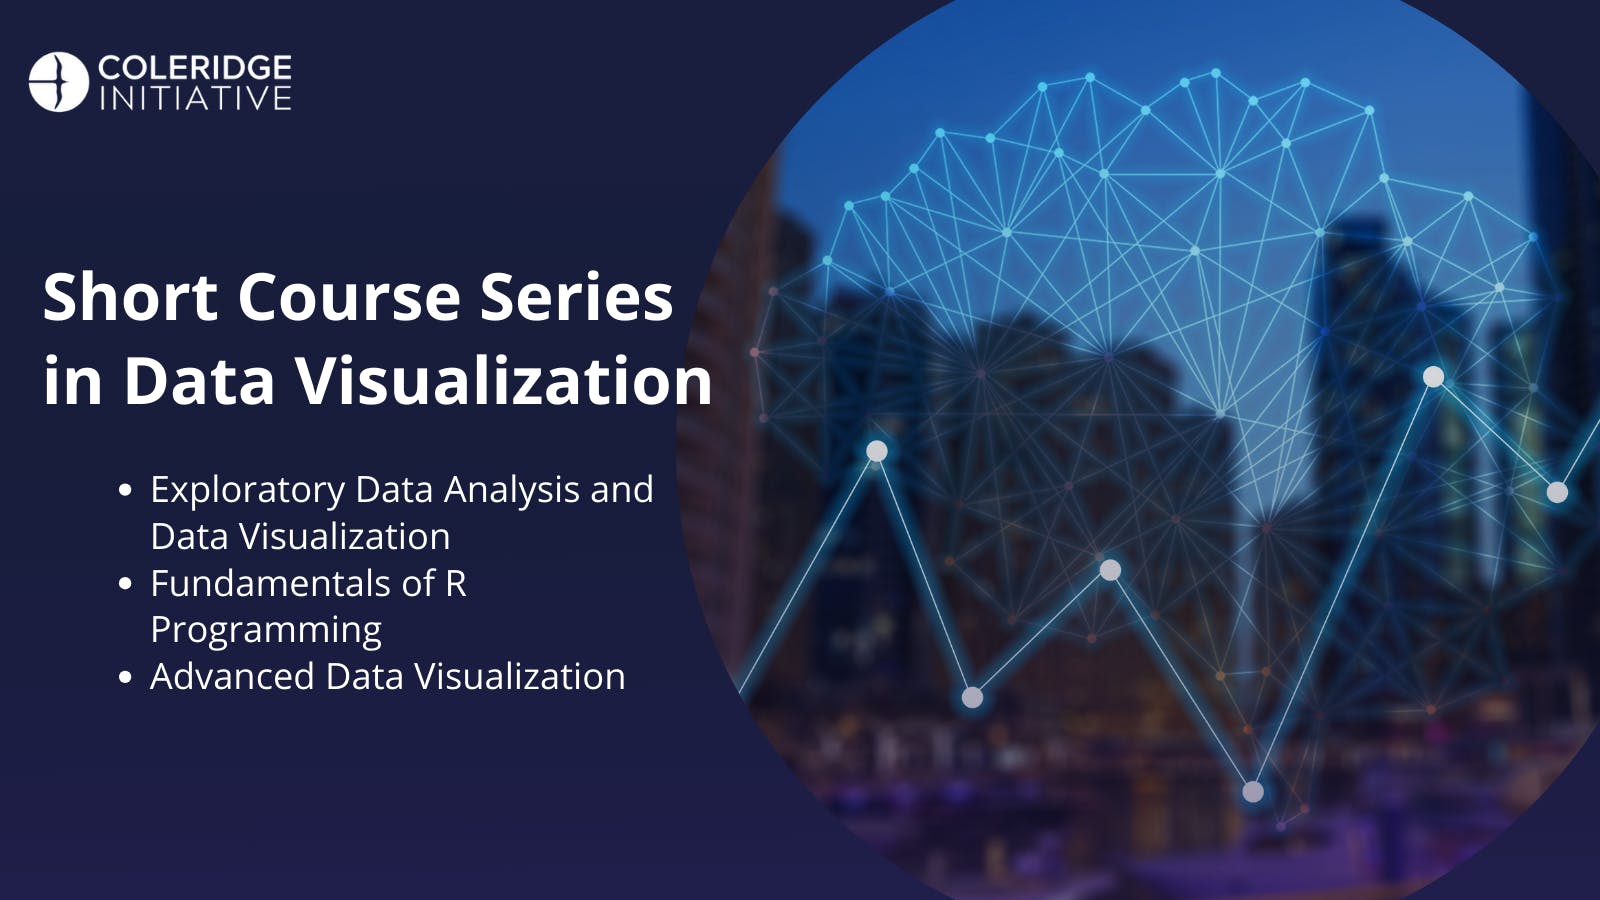 short course series in data visualization and analytics